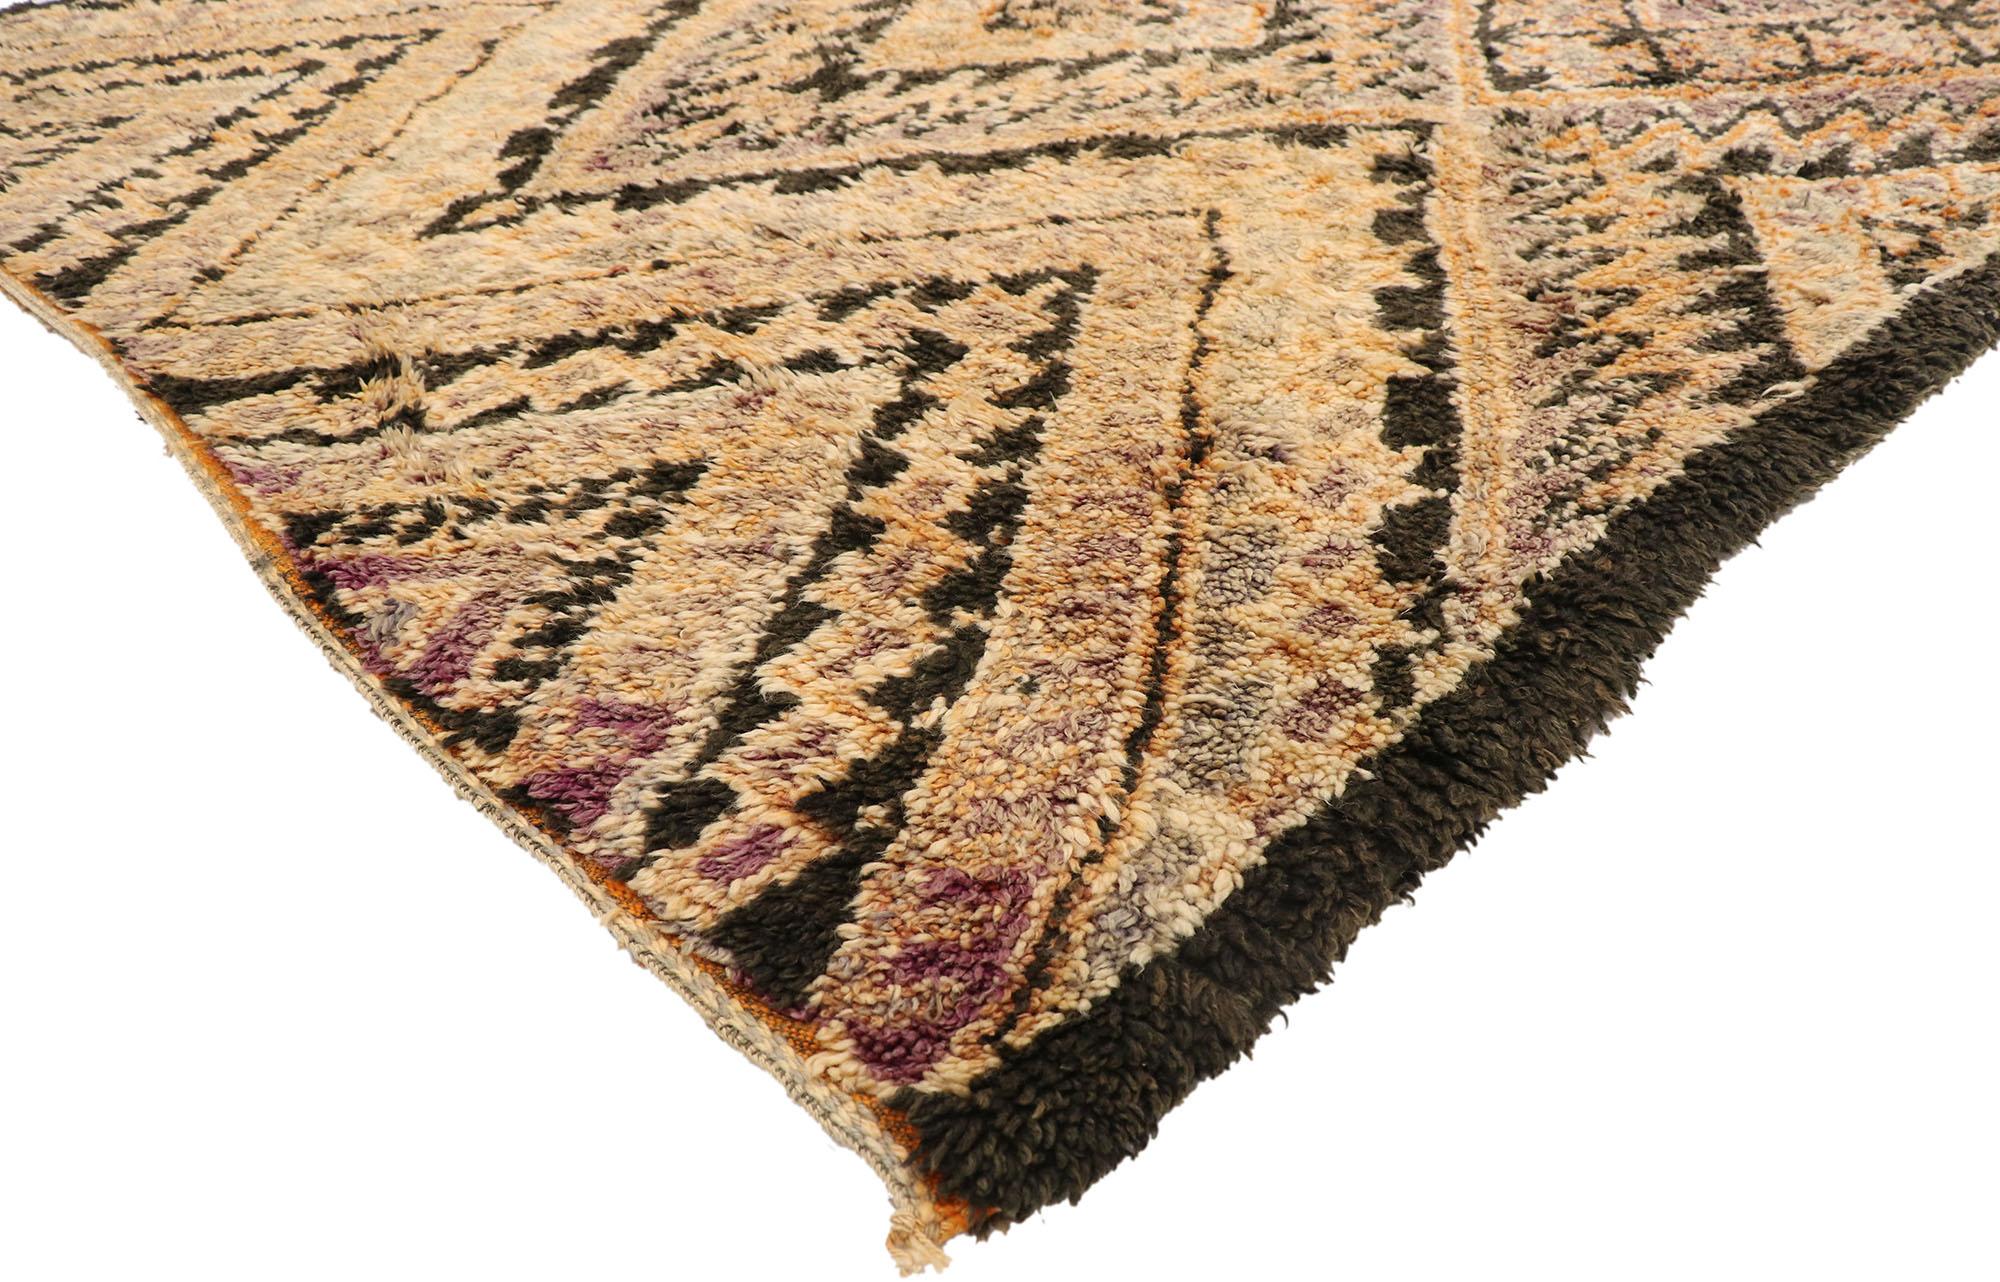 21022 Vintage Brown Beni MGuild Moroccan Rug, 06'10 x 16'09. 
Prepare for a mesmerizing adventure whisked away by the warm embace of this hand knotted wool vintage Beni MGuild Moroccan rug. This enchanting Berber carpet will transport you to a world